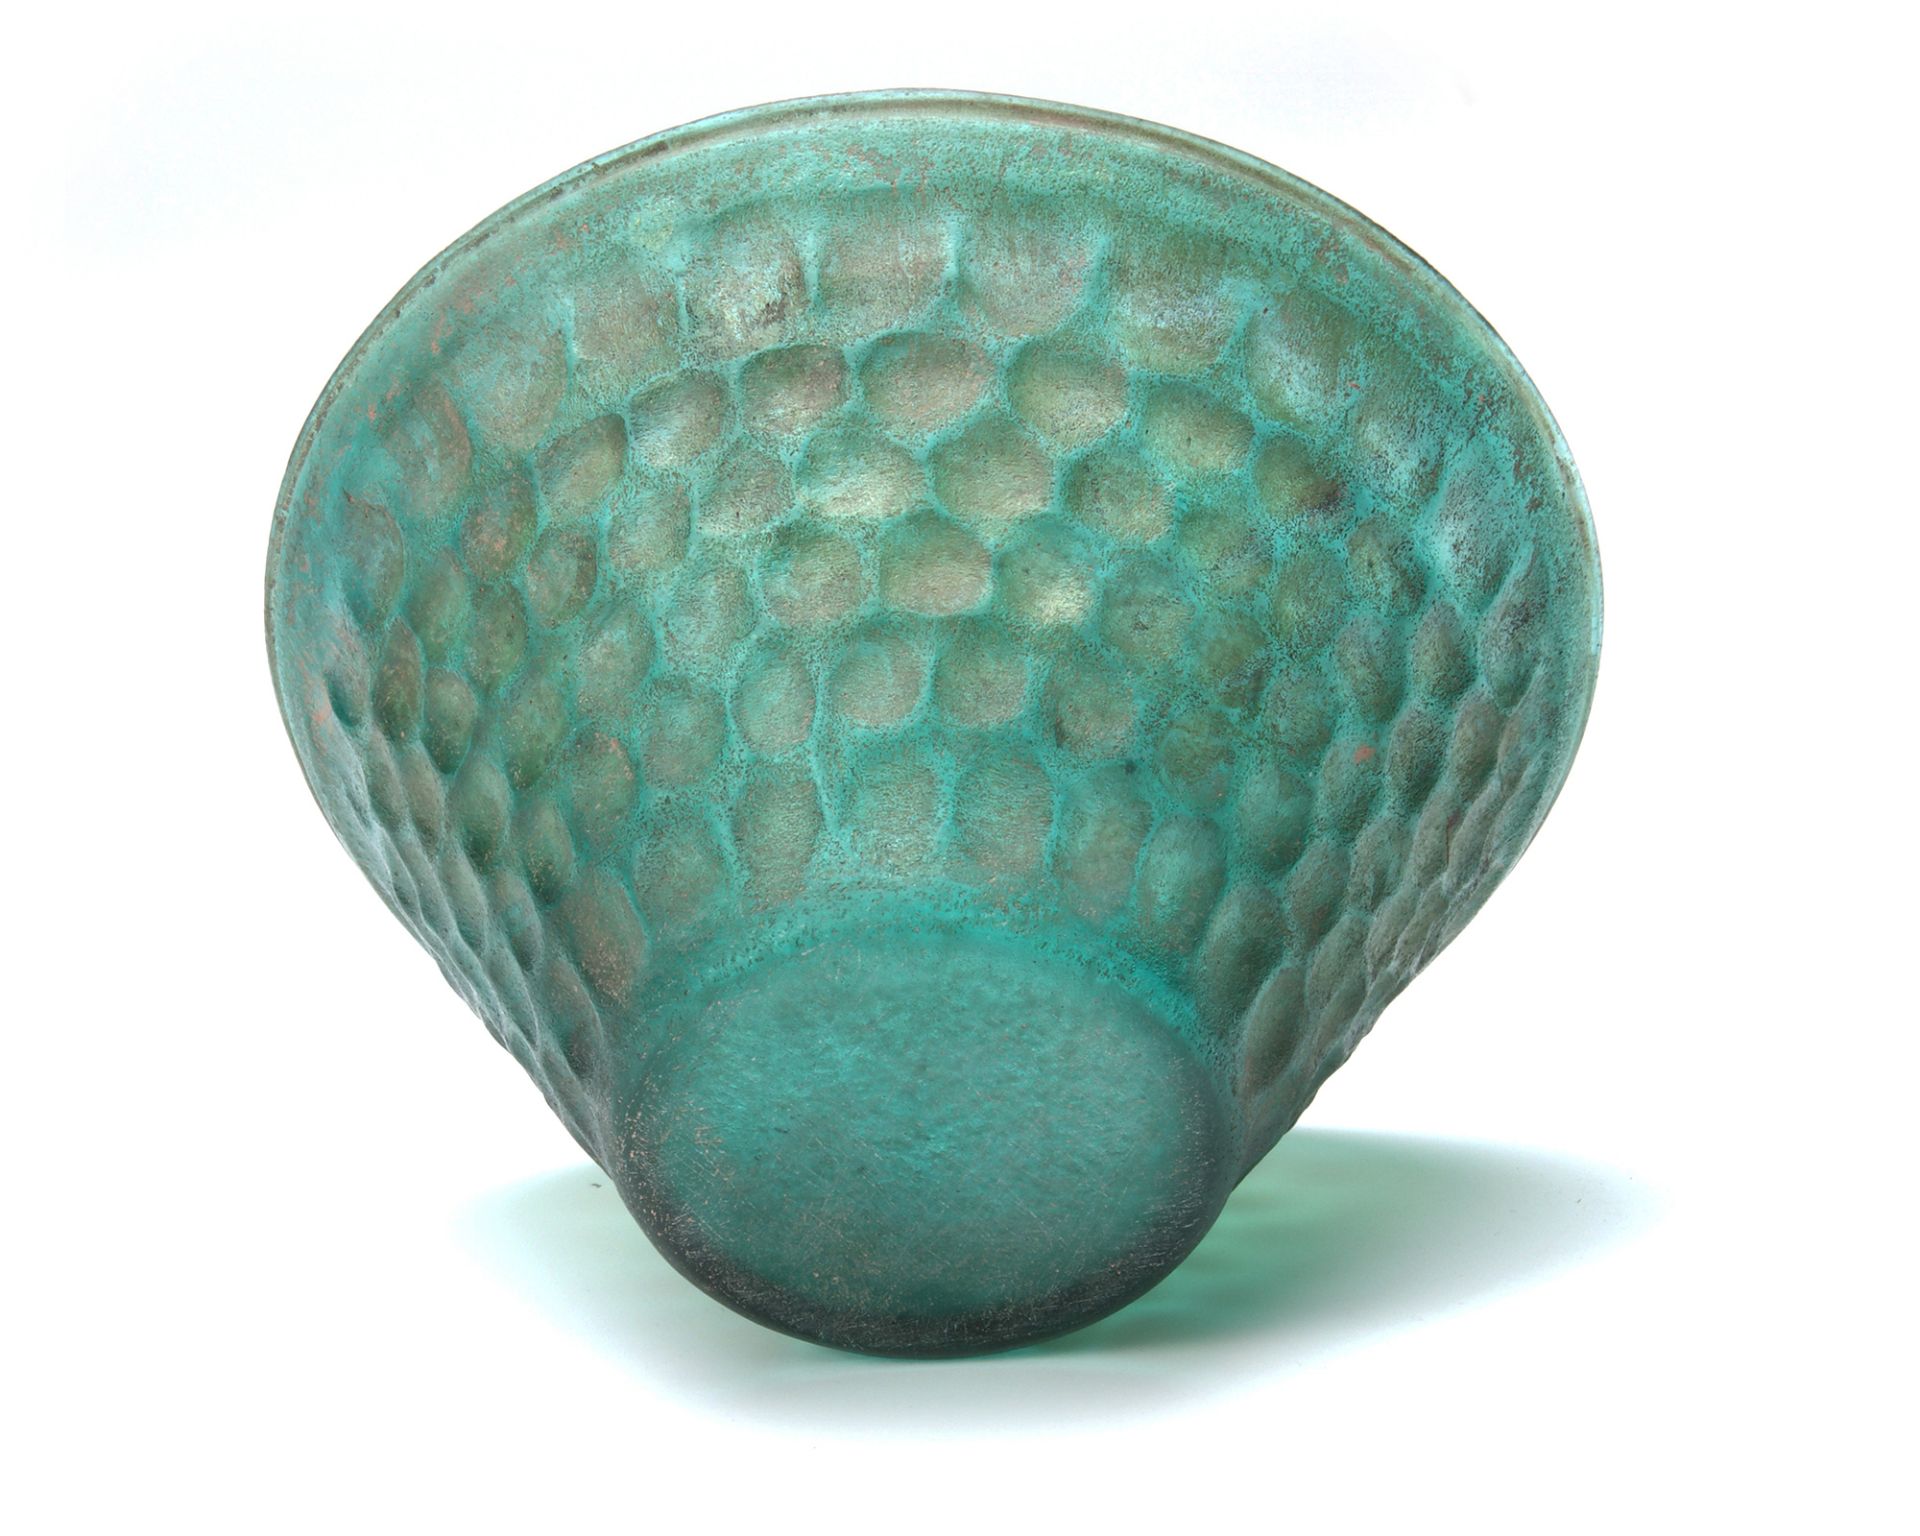 A PERSIAN GREEN CUT GLASS BOWL, 8TH-9TH CENTURY - Image 5 of 10